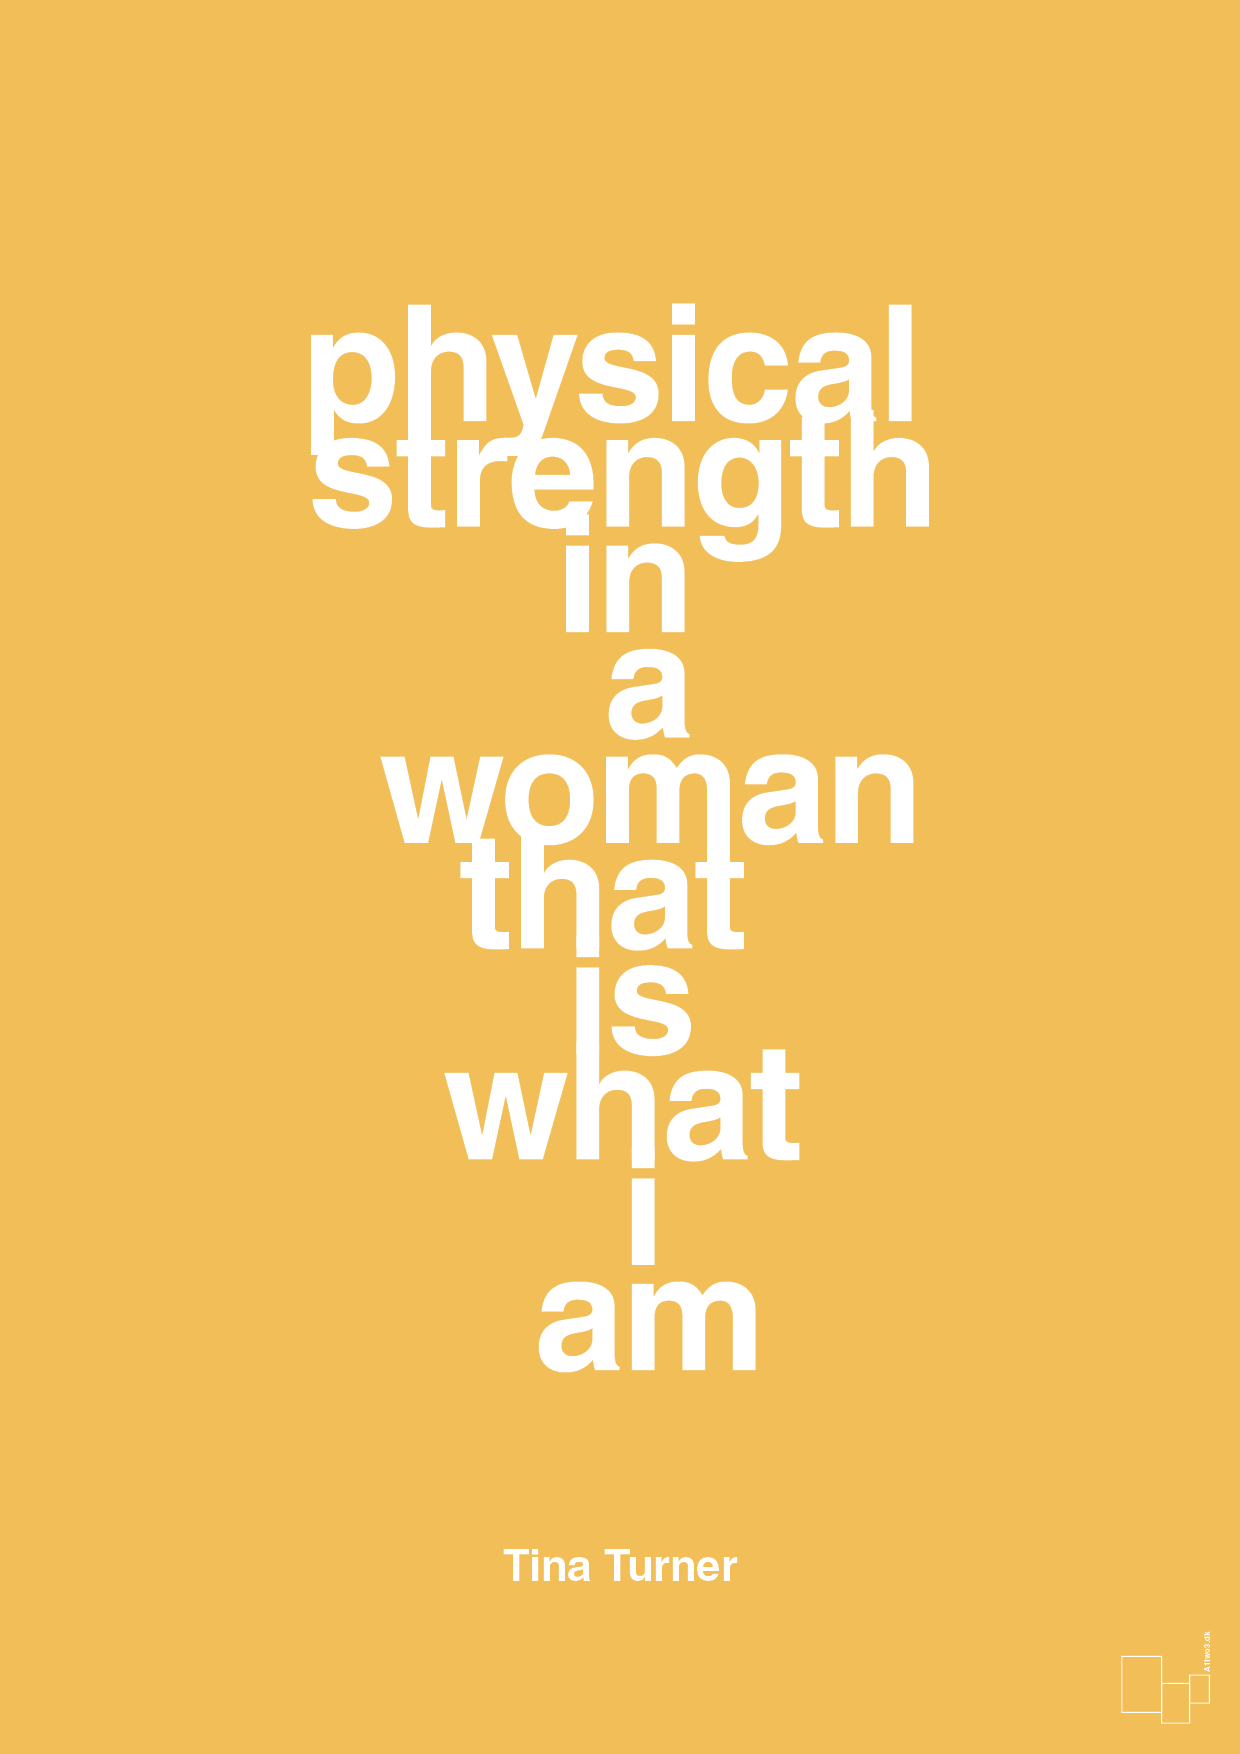 physical strength in a woman that’s what I am - Plakat med Citater i Honeycomb